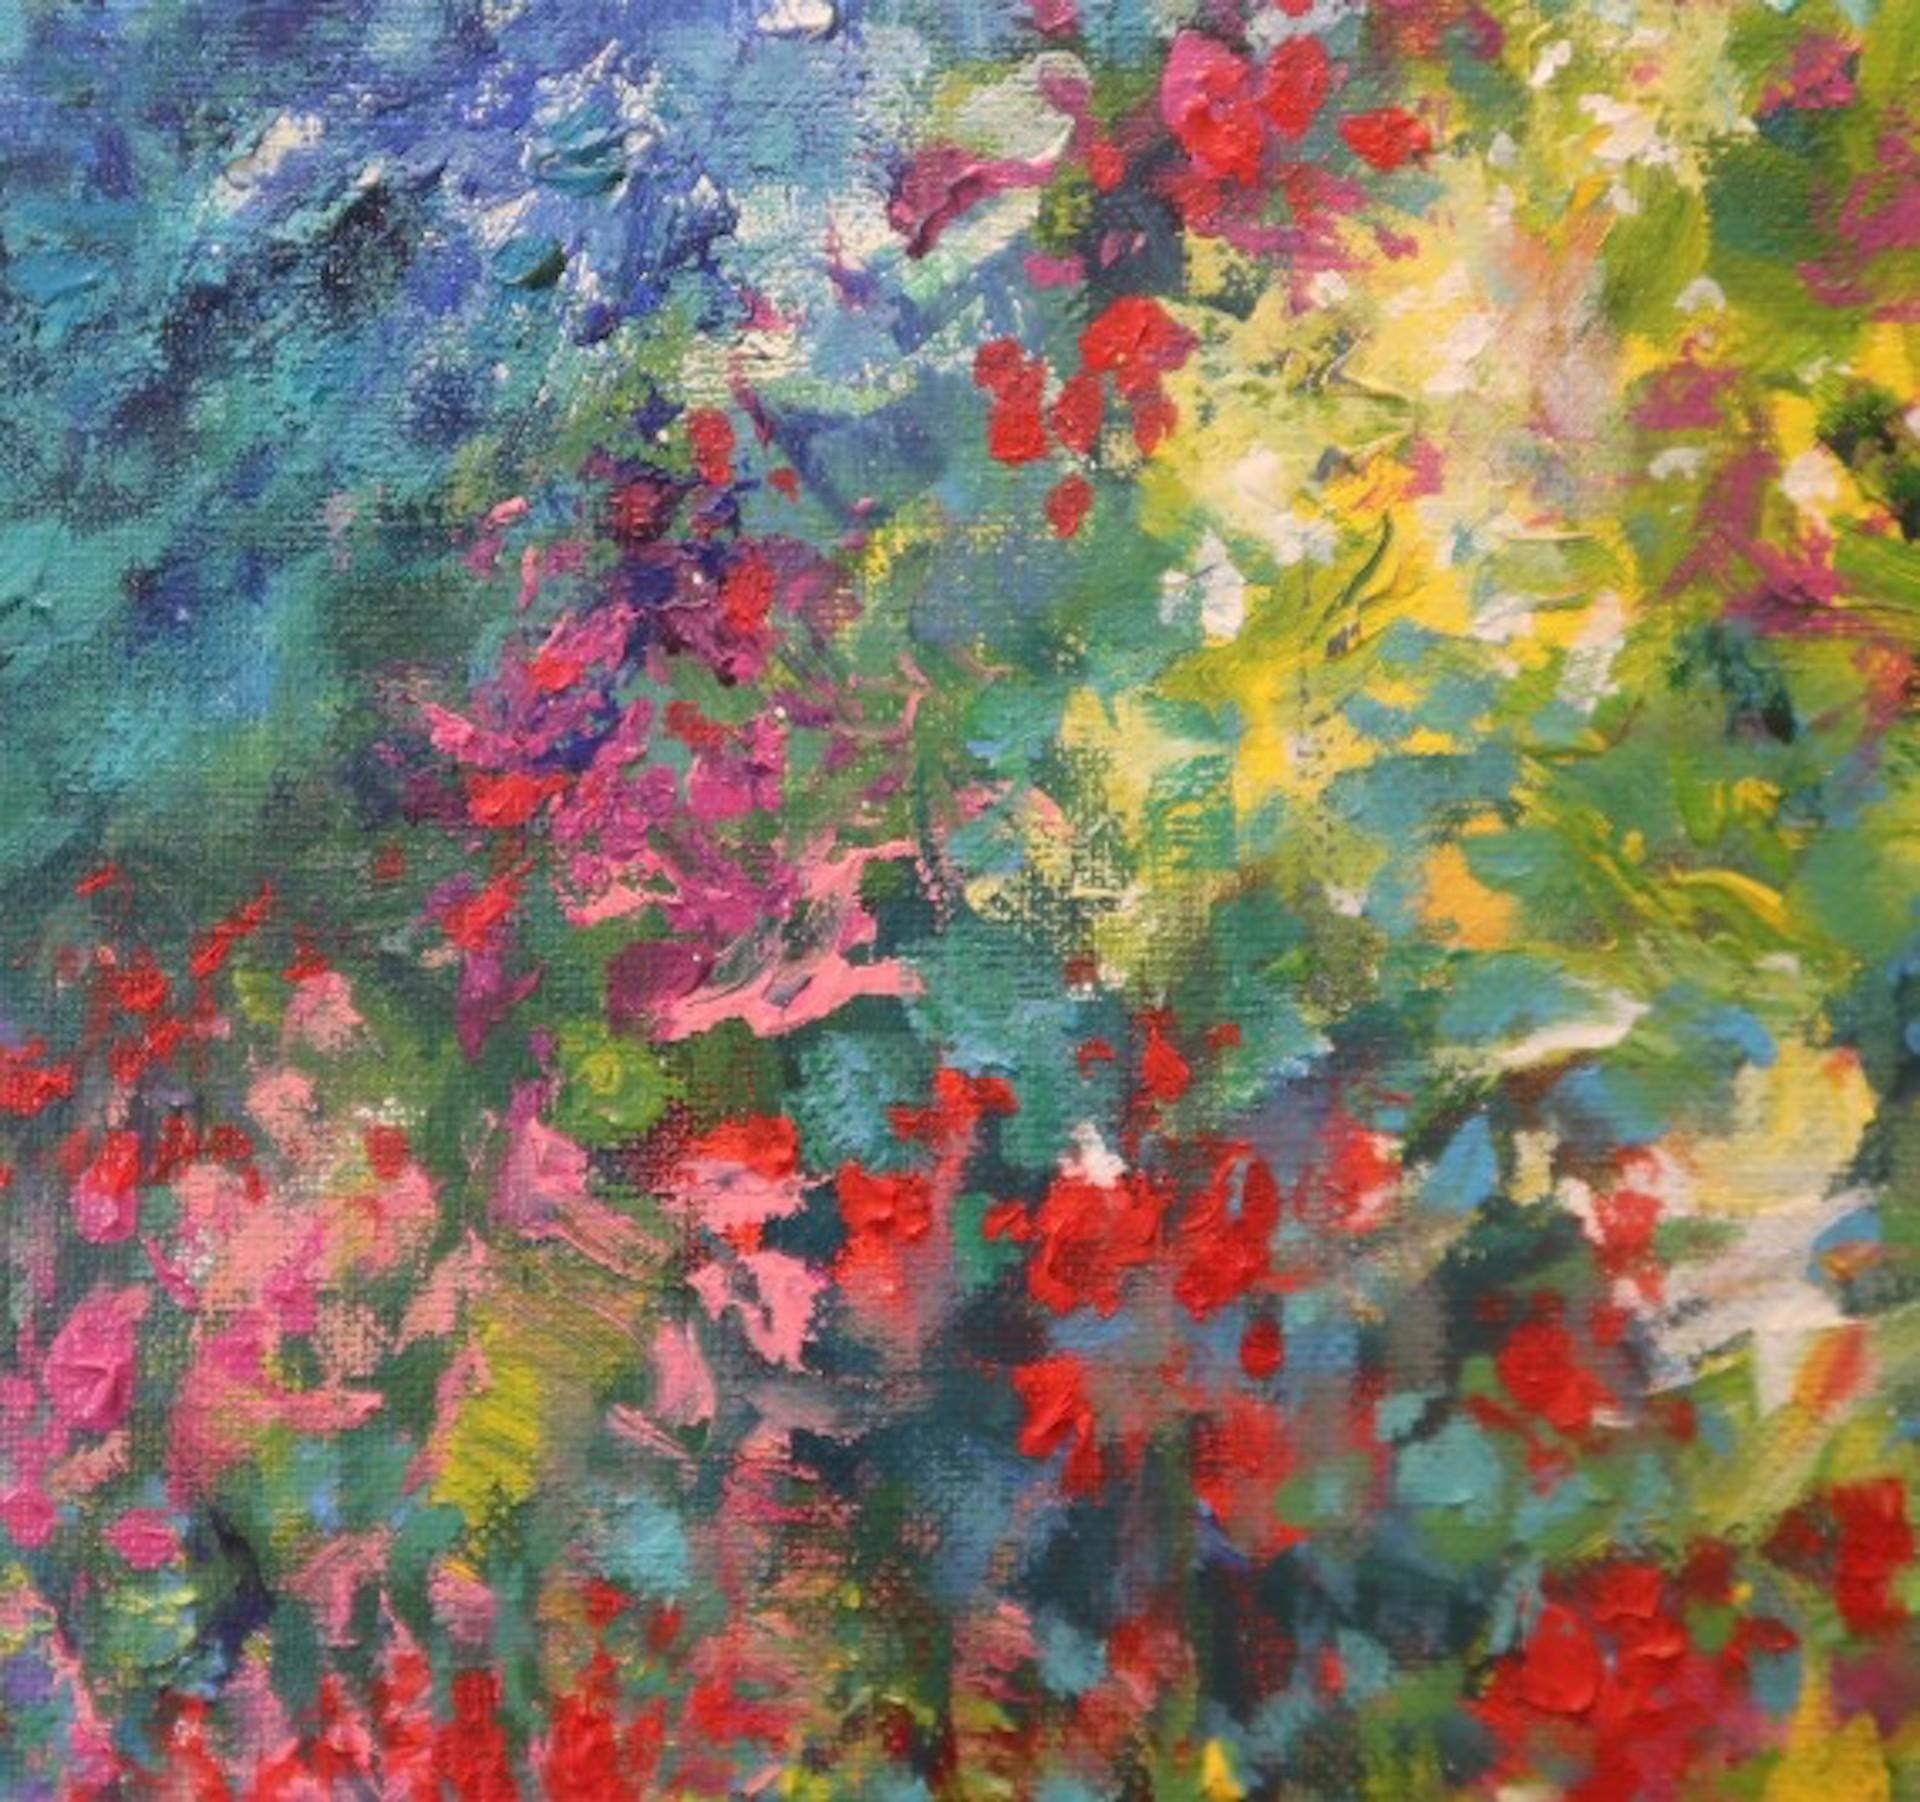 Rose Time At Monet's Garden, Mary Chaplin, Original, Floral Landscape Painting 2